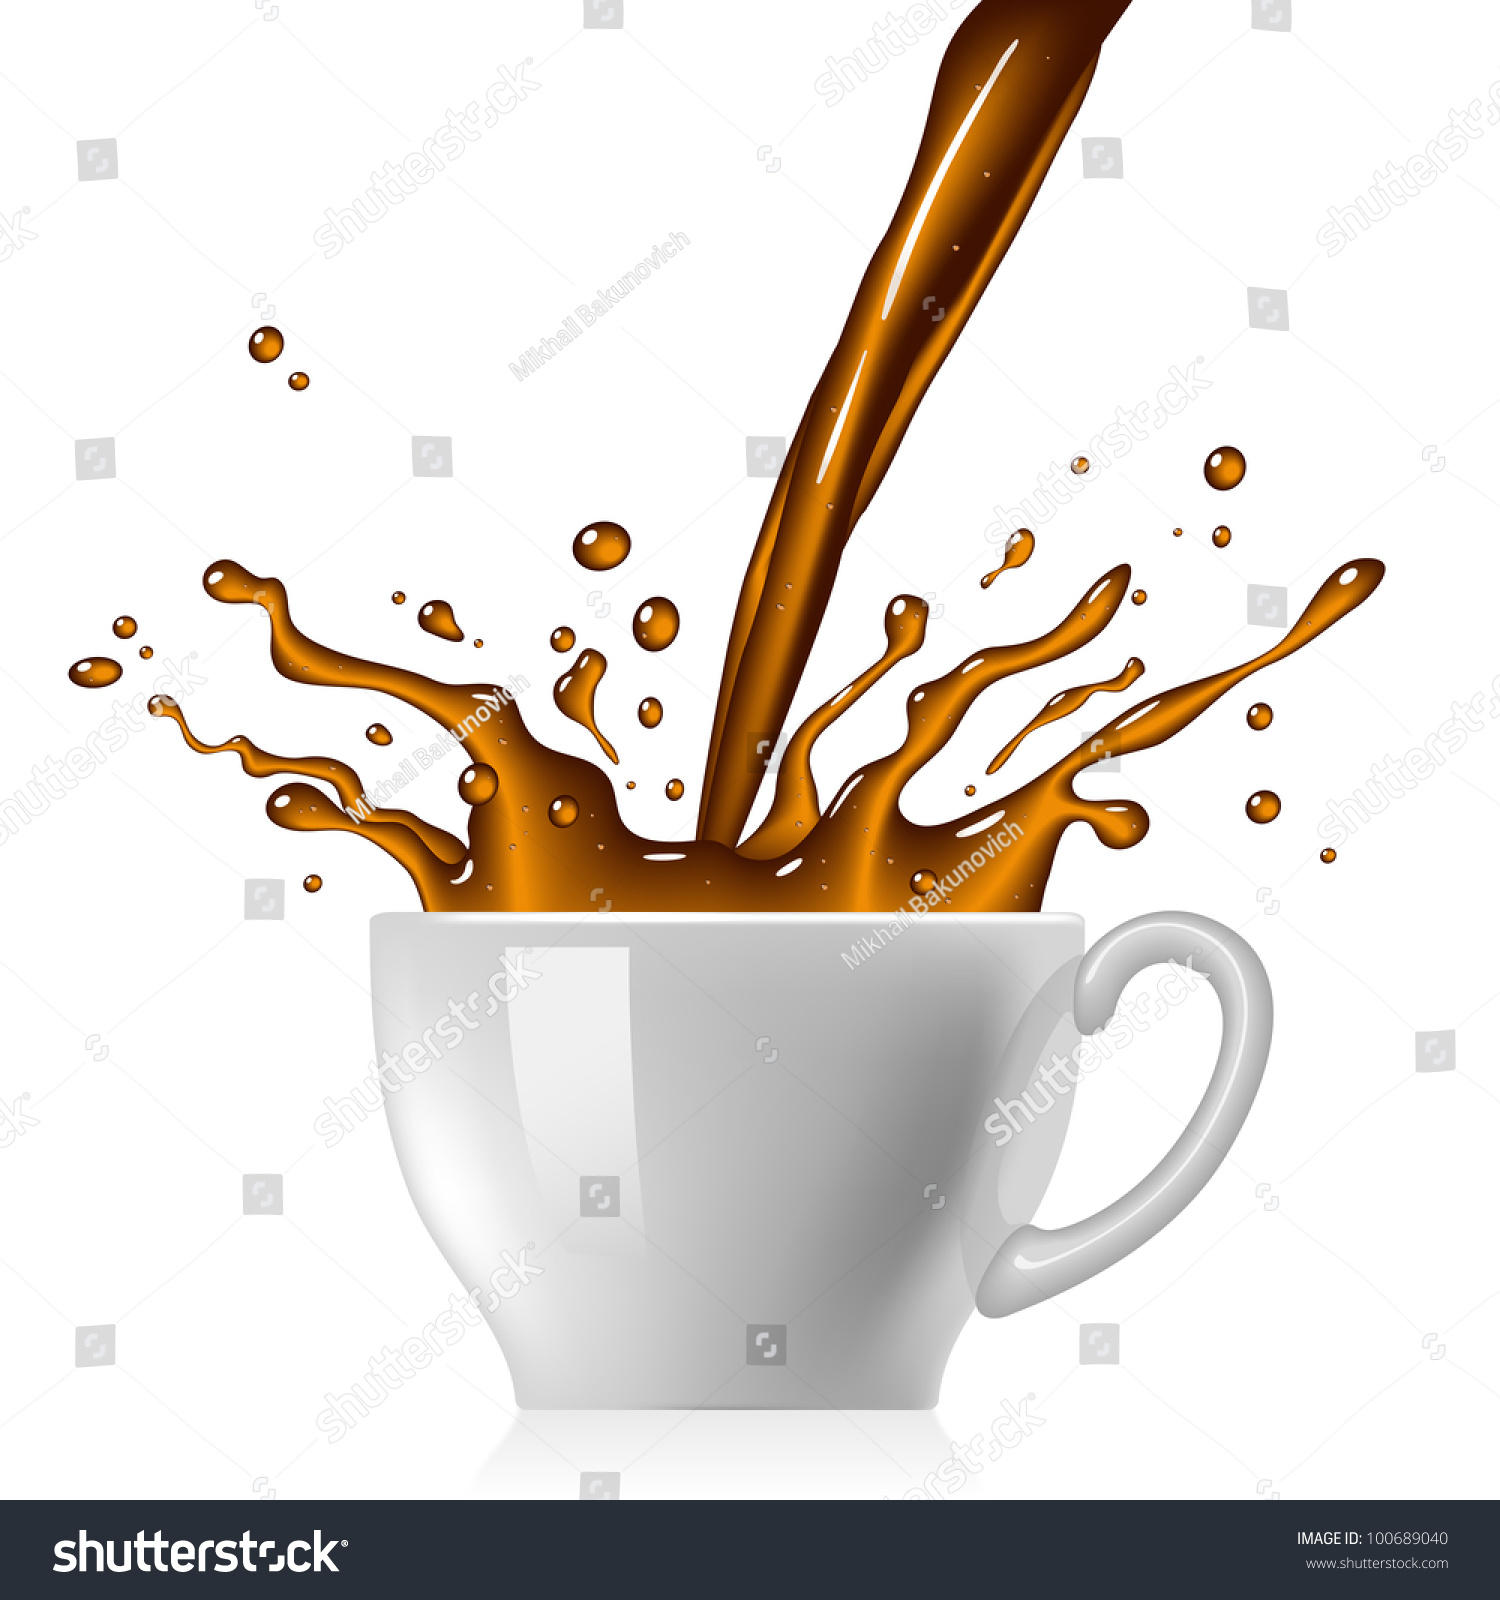 coffee spill clipart - photo #47